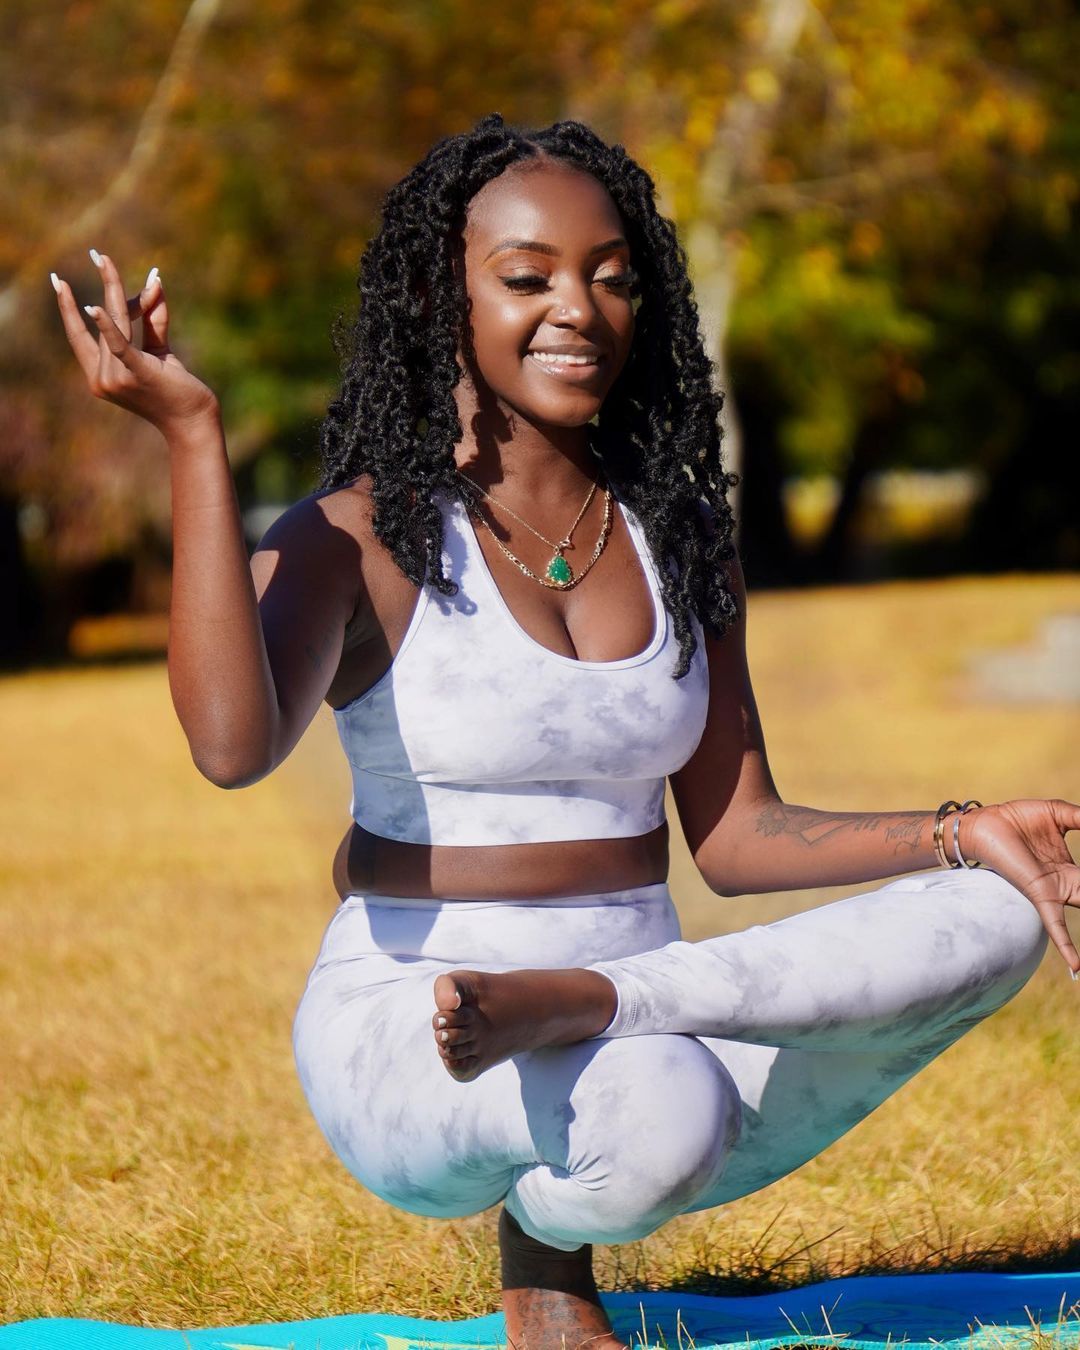 How Meditation for Anxiety Helped This Woman Control Her Symptoms